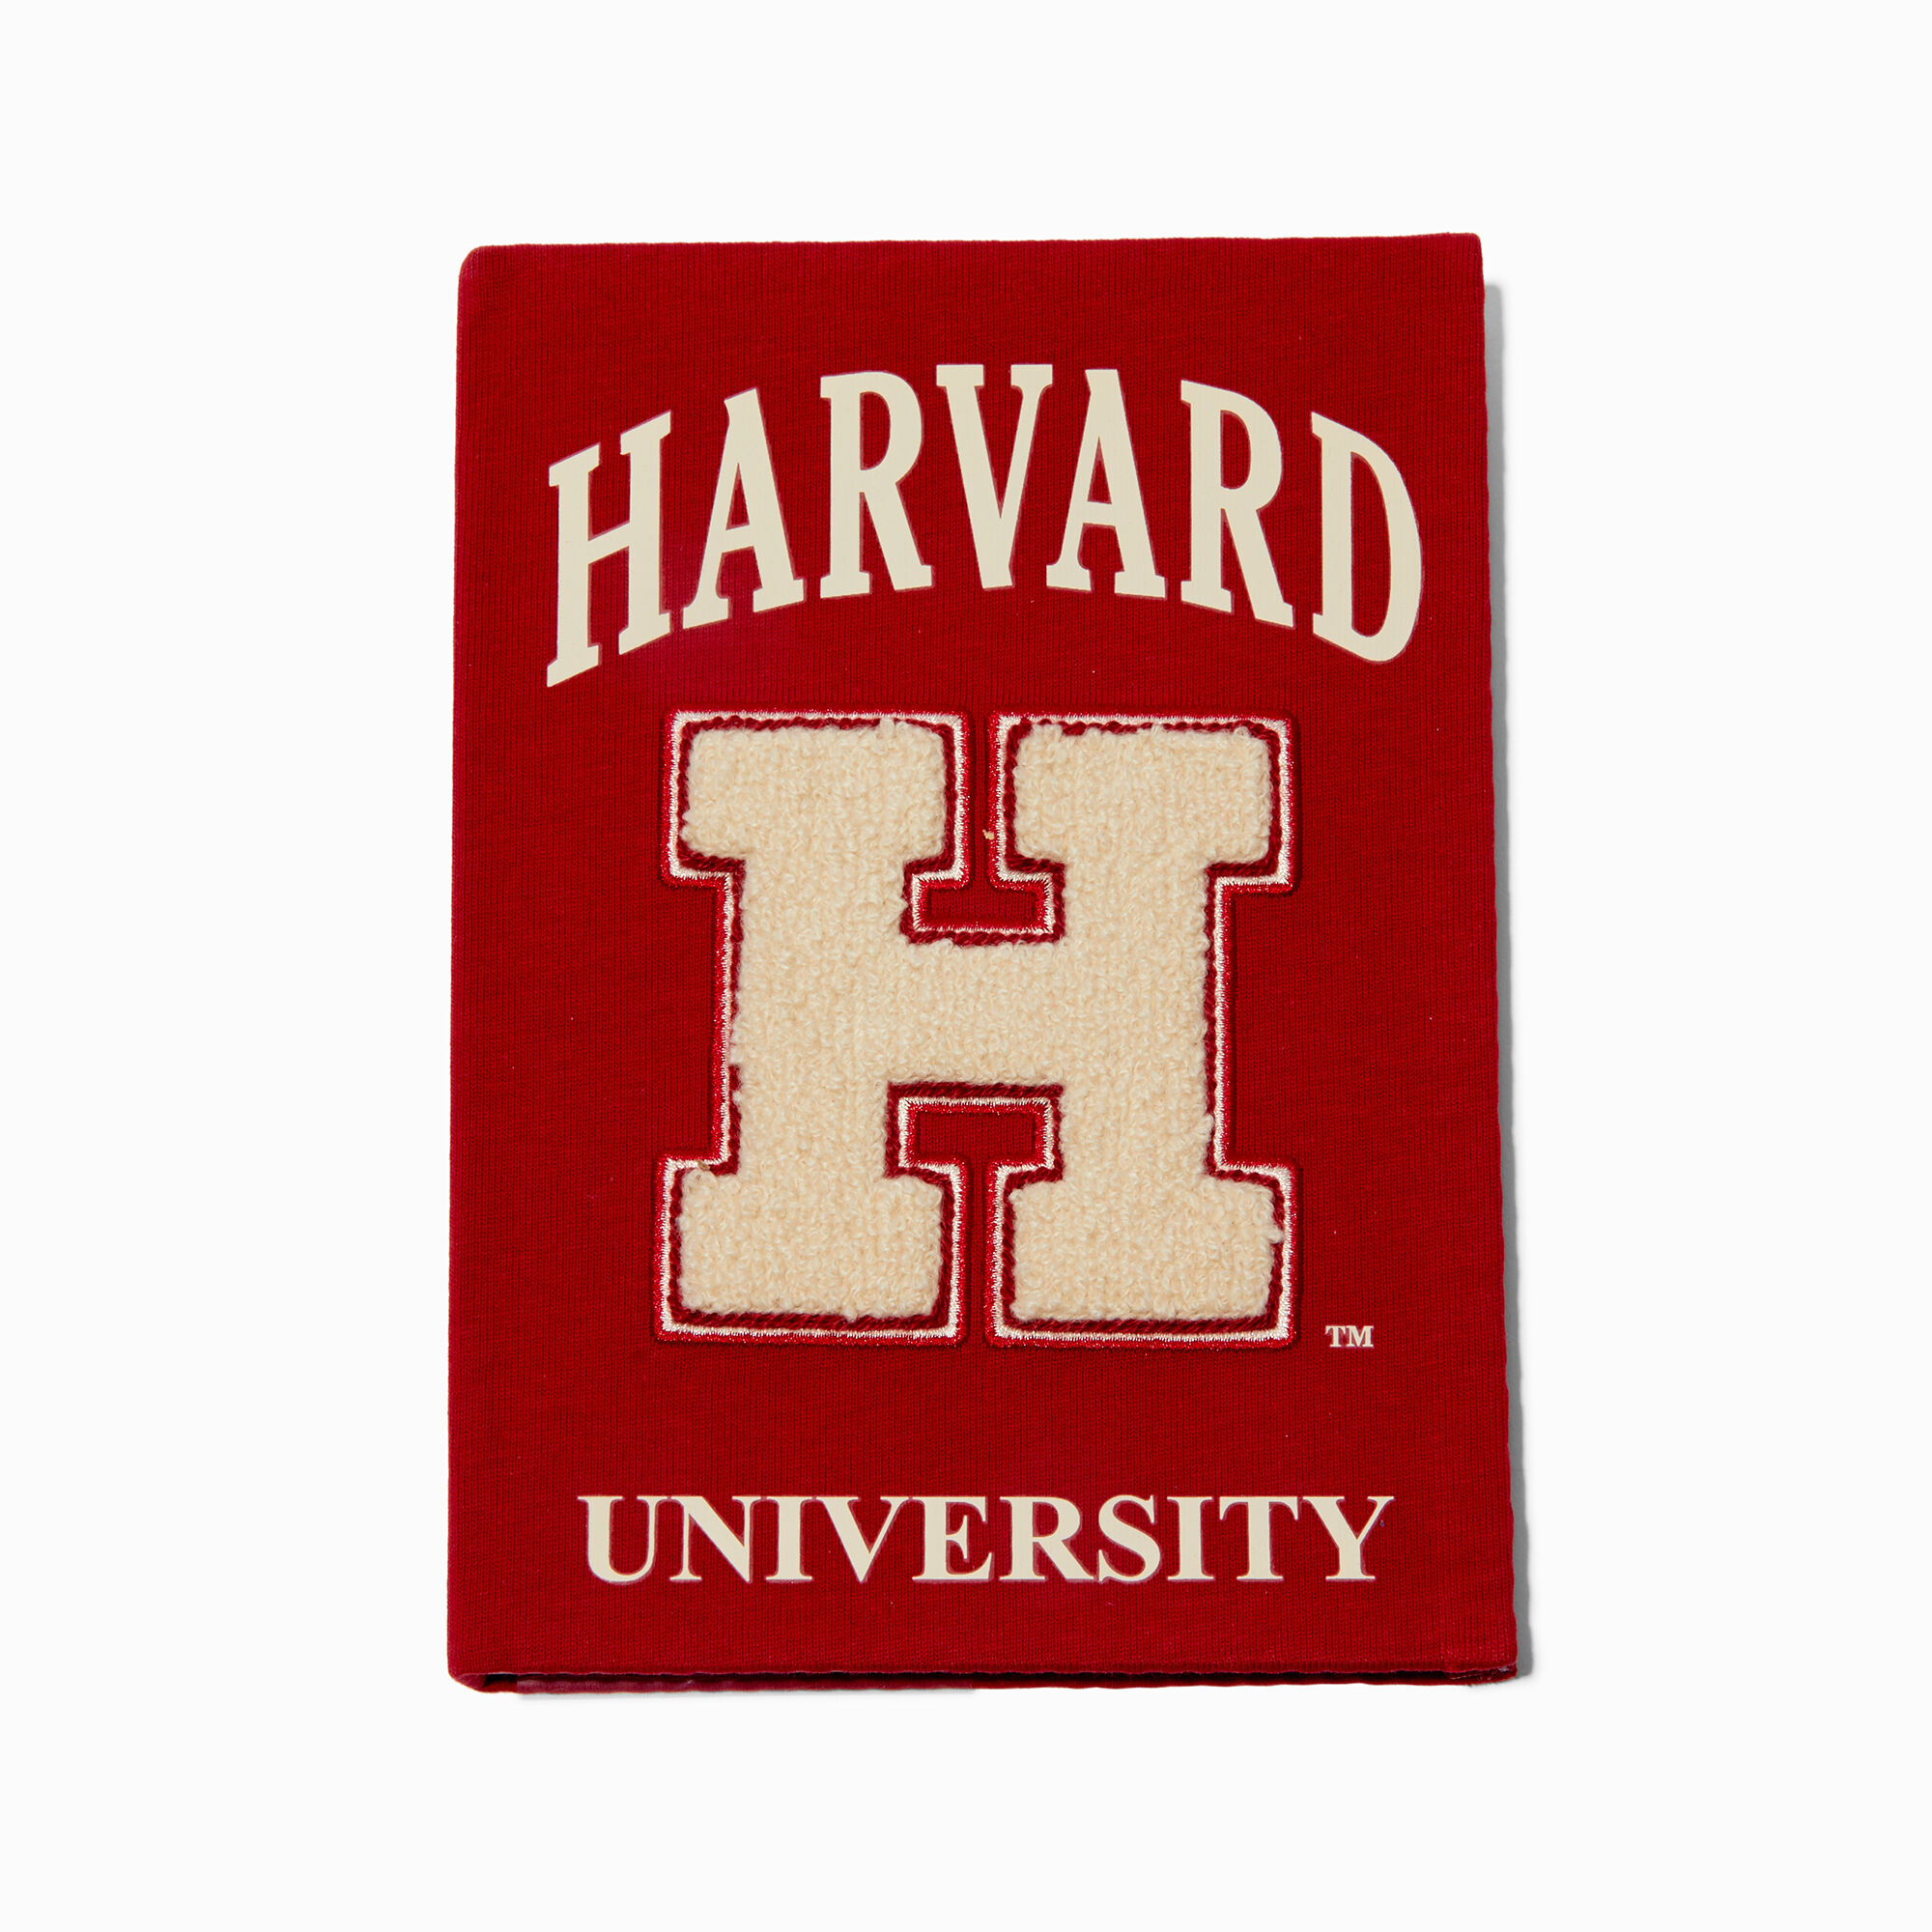 View Claires Harvard Notebook information